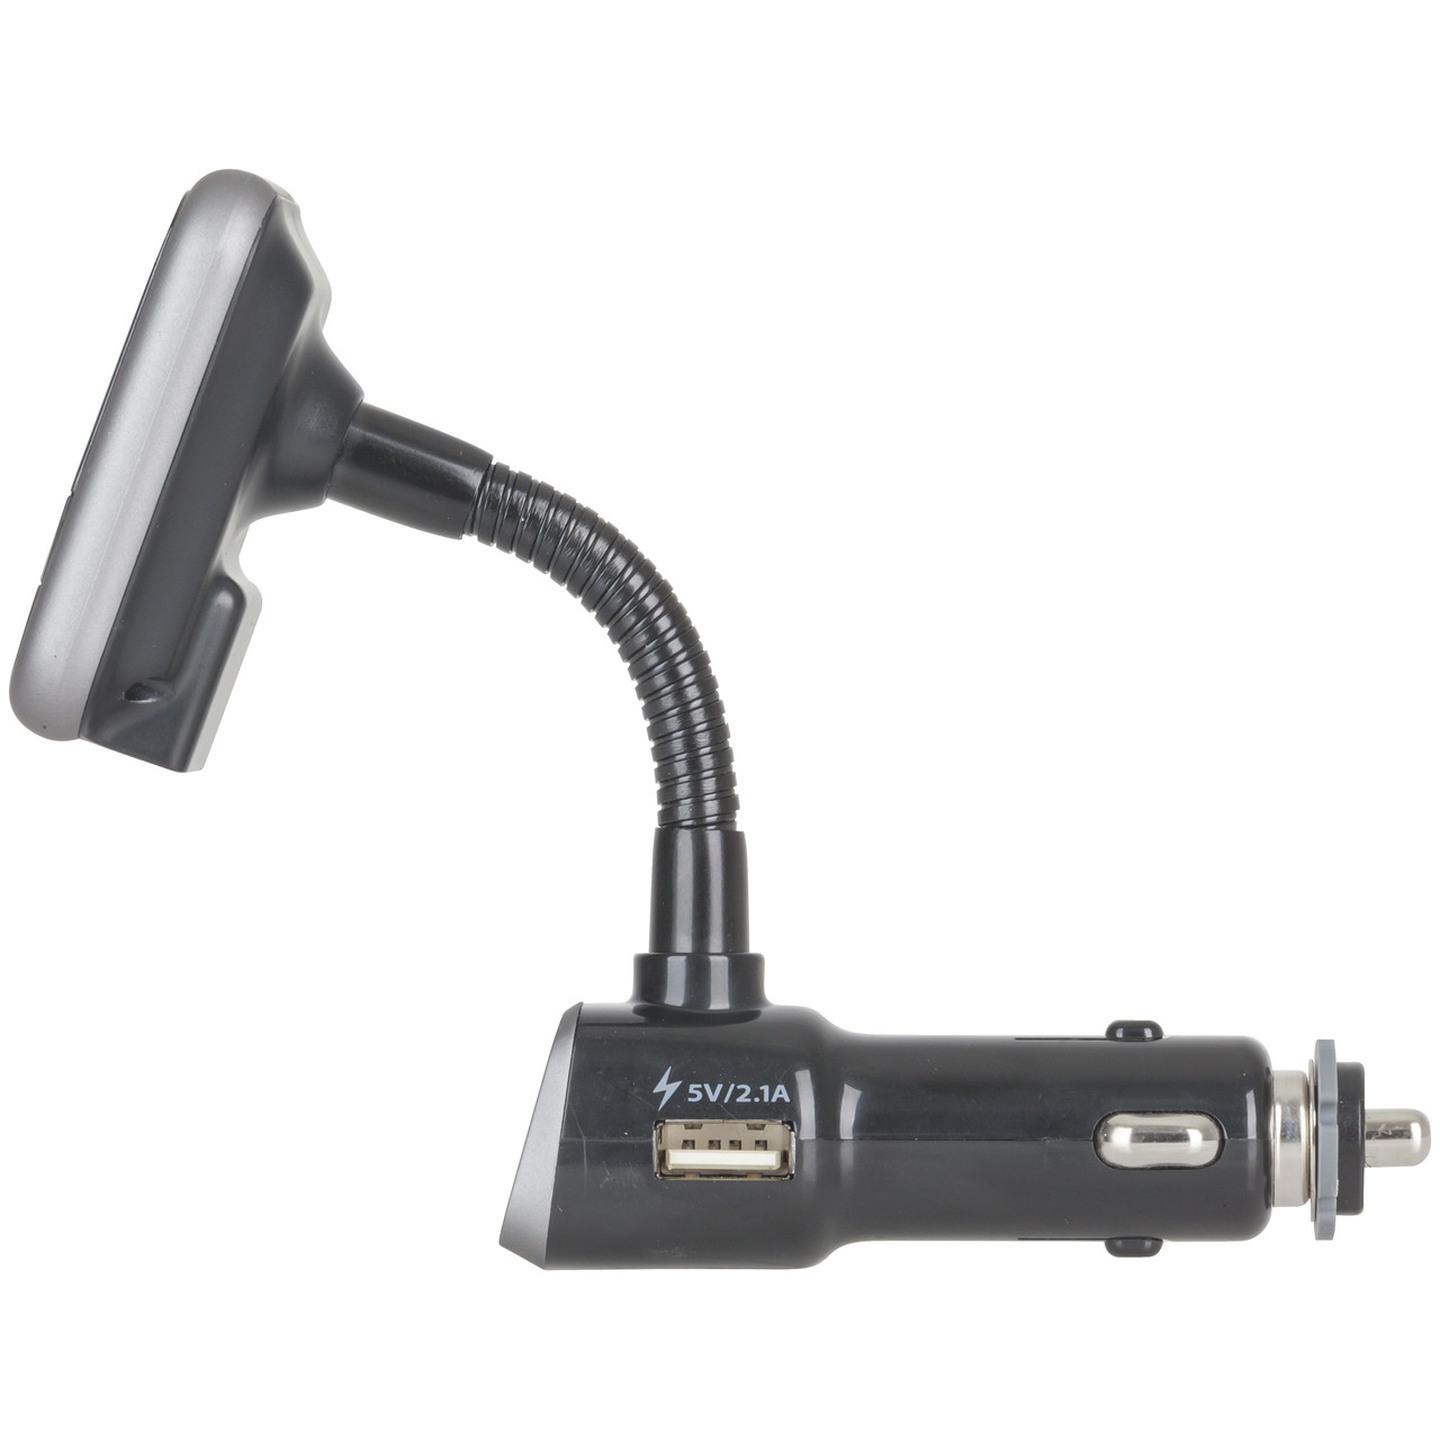 Bluetooth Handsfree with FM Transmitter and USB Charge Port